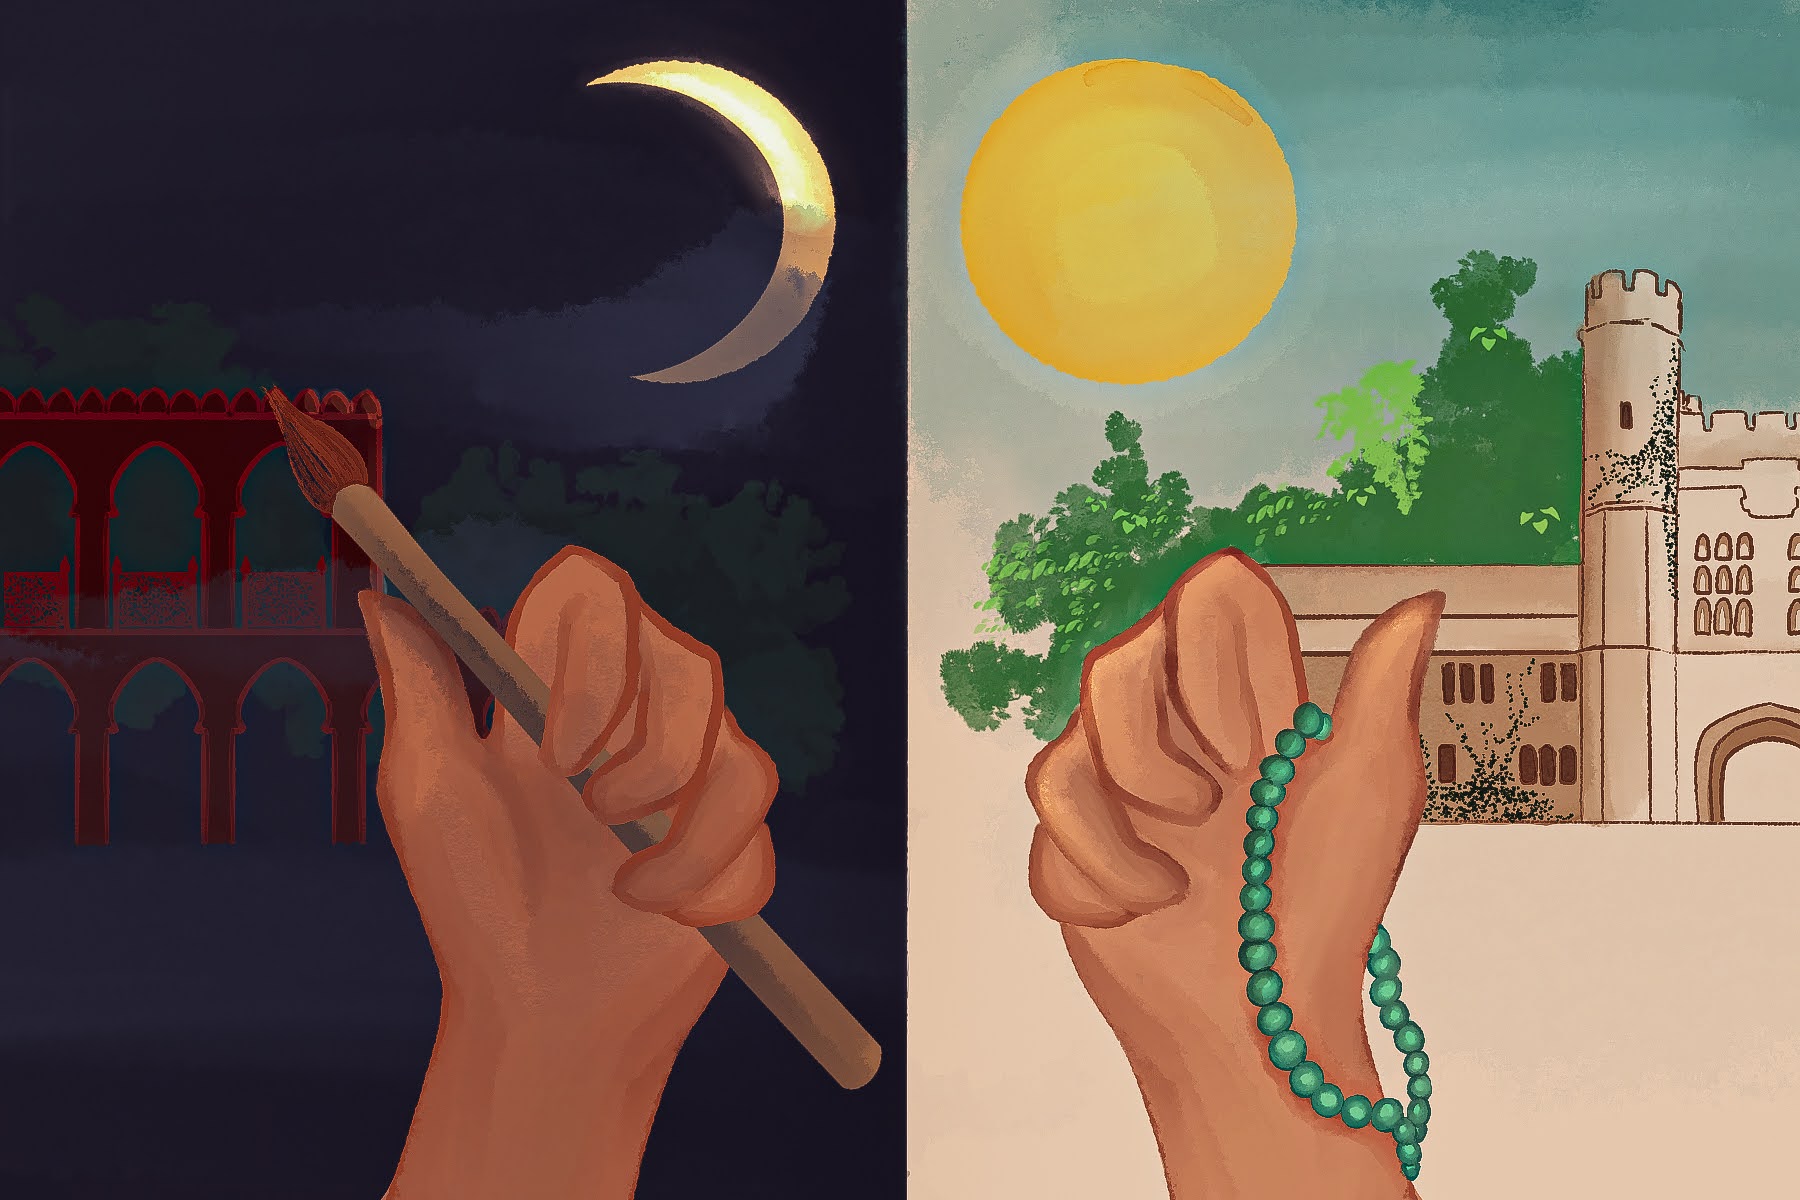 Image: Illustration by Saadia Yasmin Pervaiz. Two hands are posed, each in front of a different backdrop. The hand on the left holds a paintbrush with a background of Mughal architecture while the hand on the right holds a tasbih in front of a college campus.